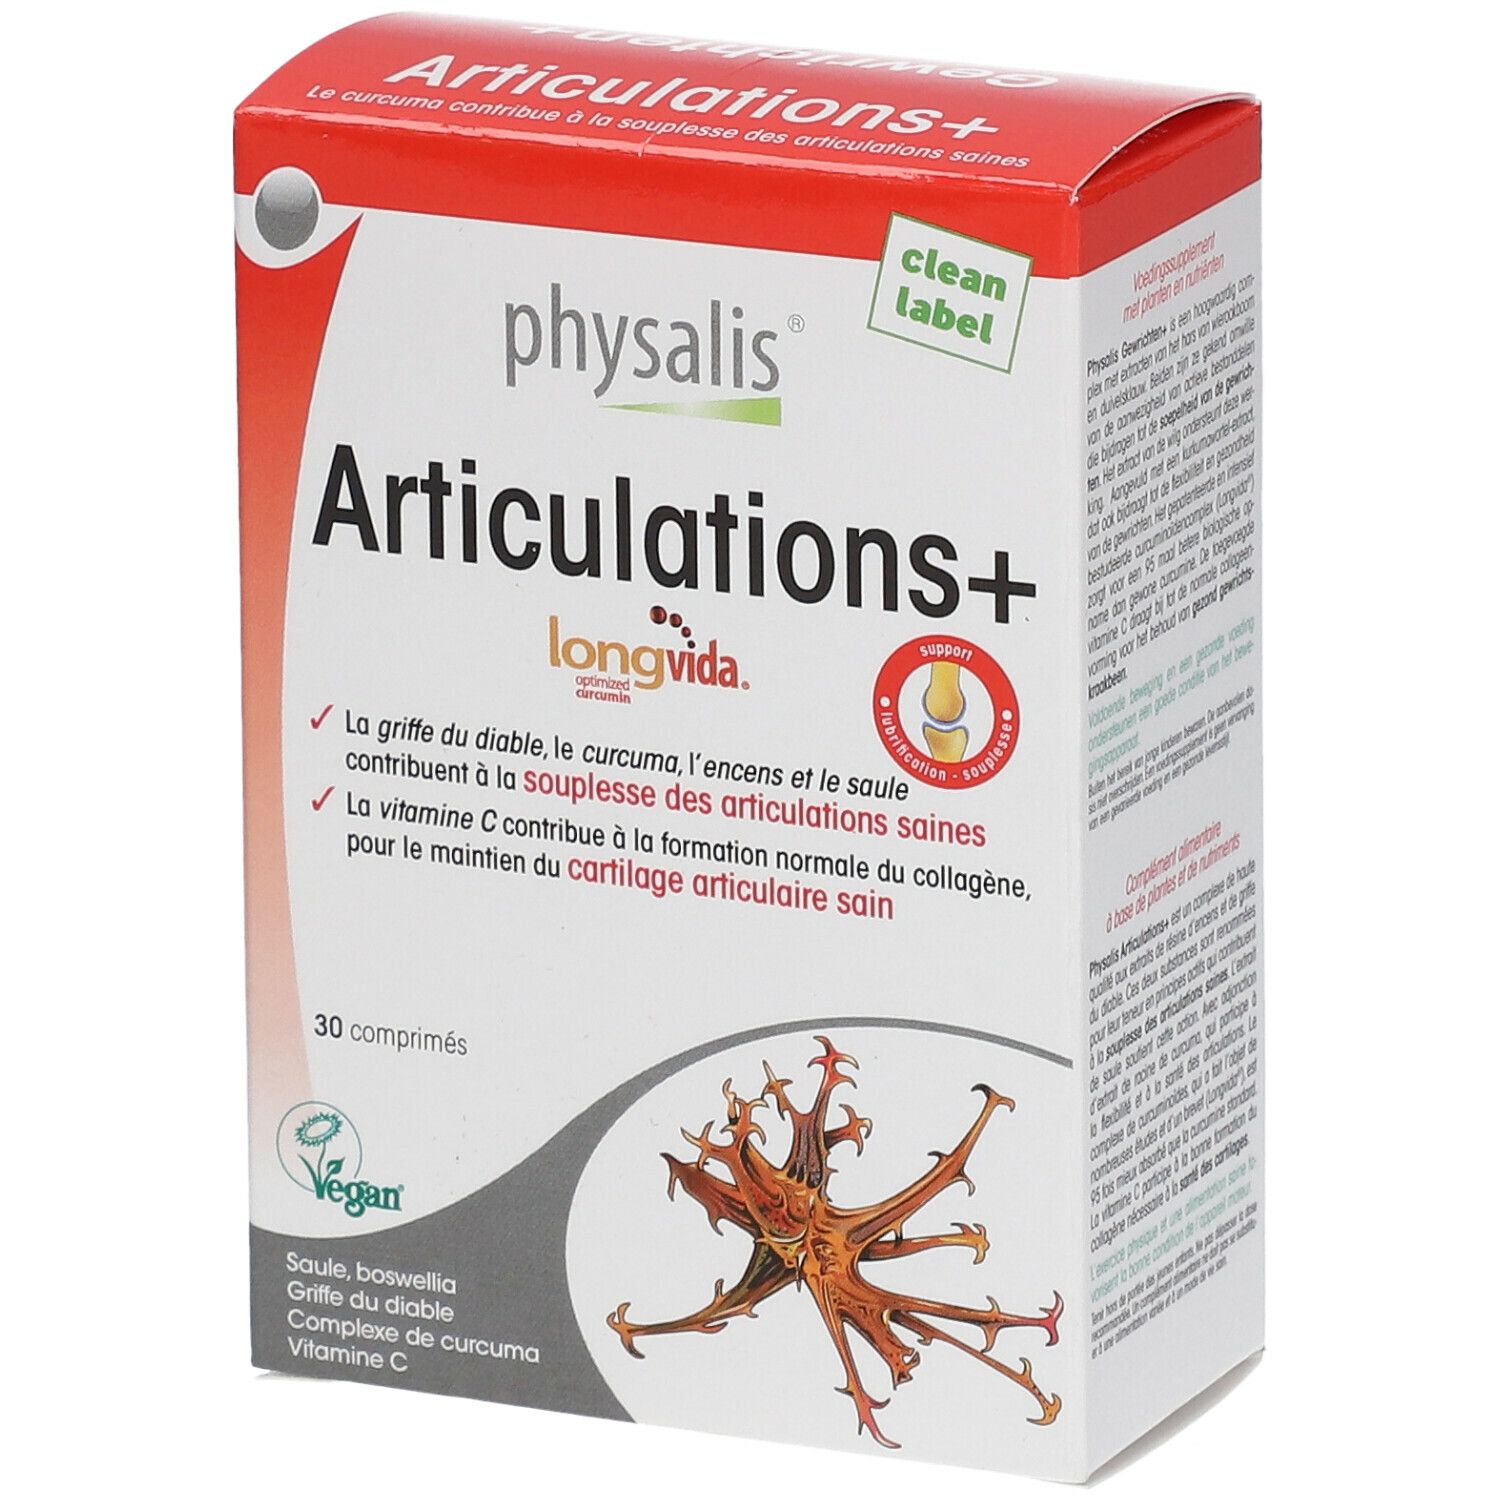 physalis® Articulations+